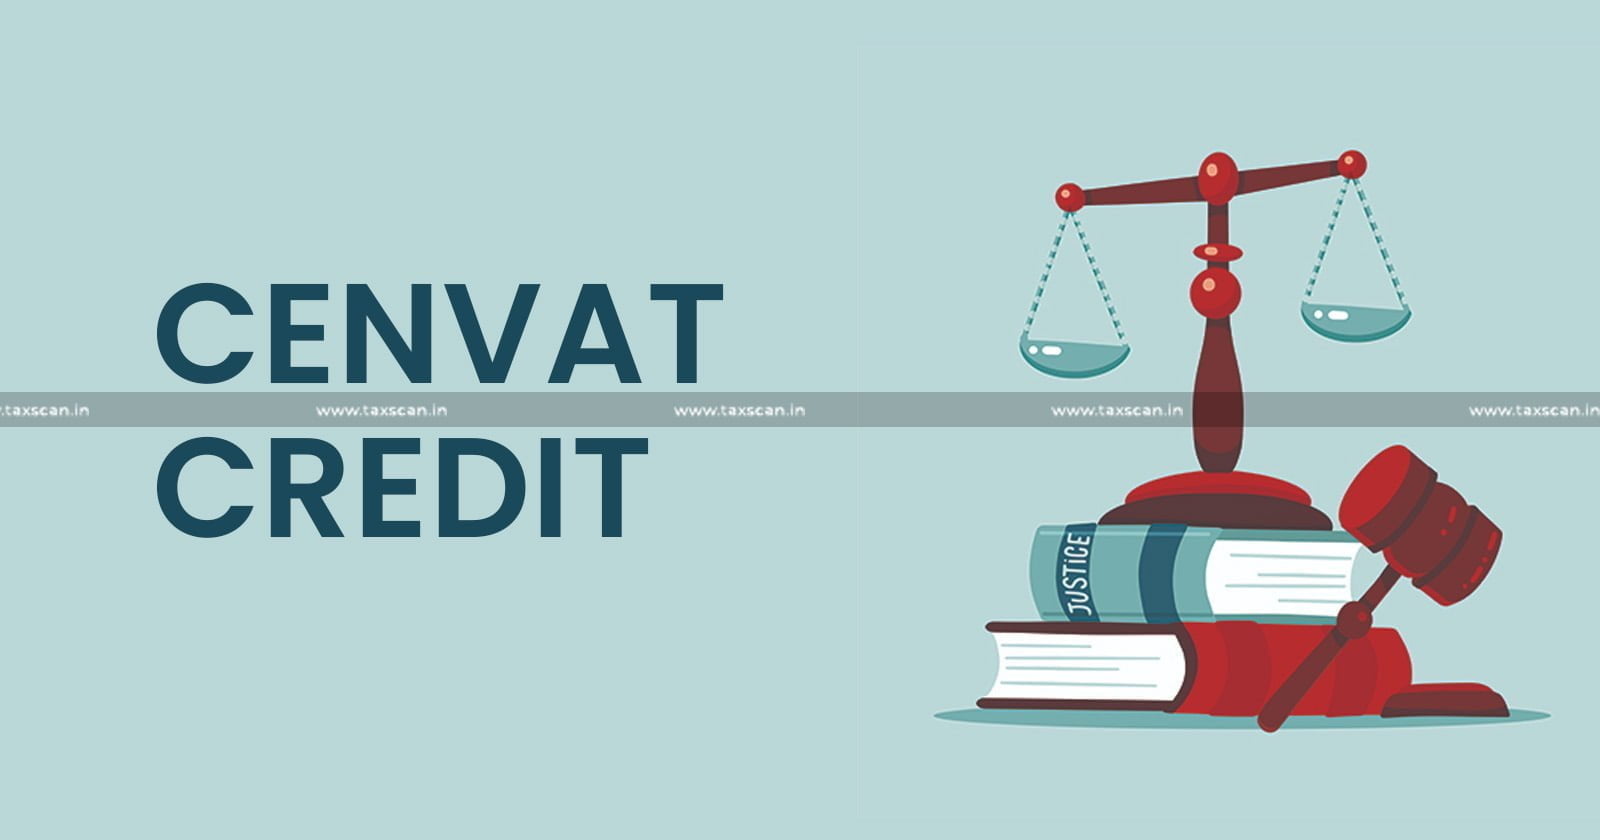 cenvat credit - Customs - Excise - Service Tax - Appellate Tribunal - Duty Exempted - TAXSCAN